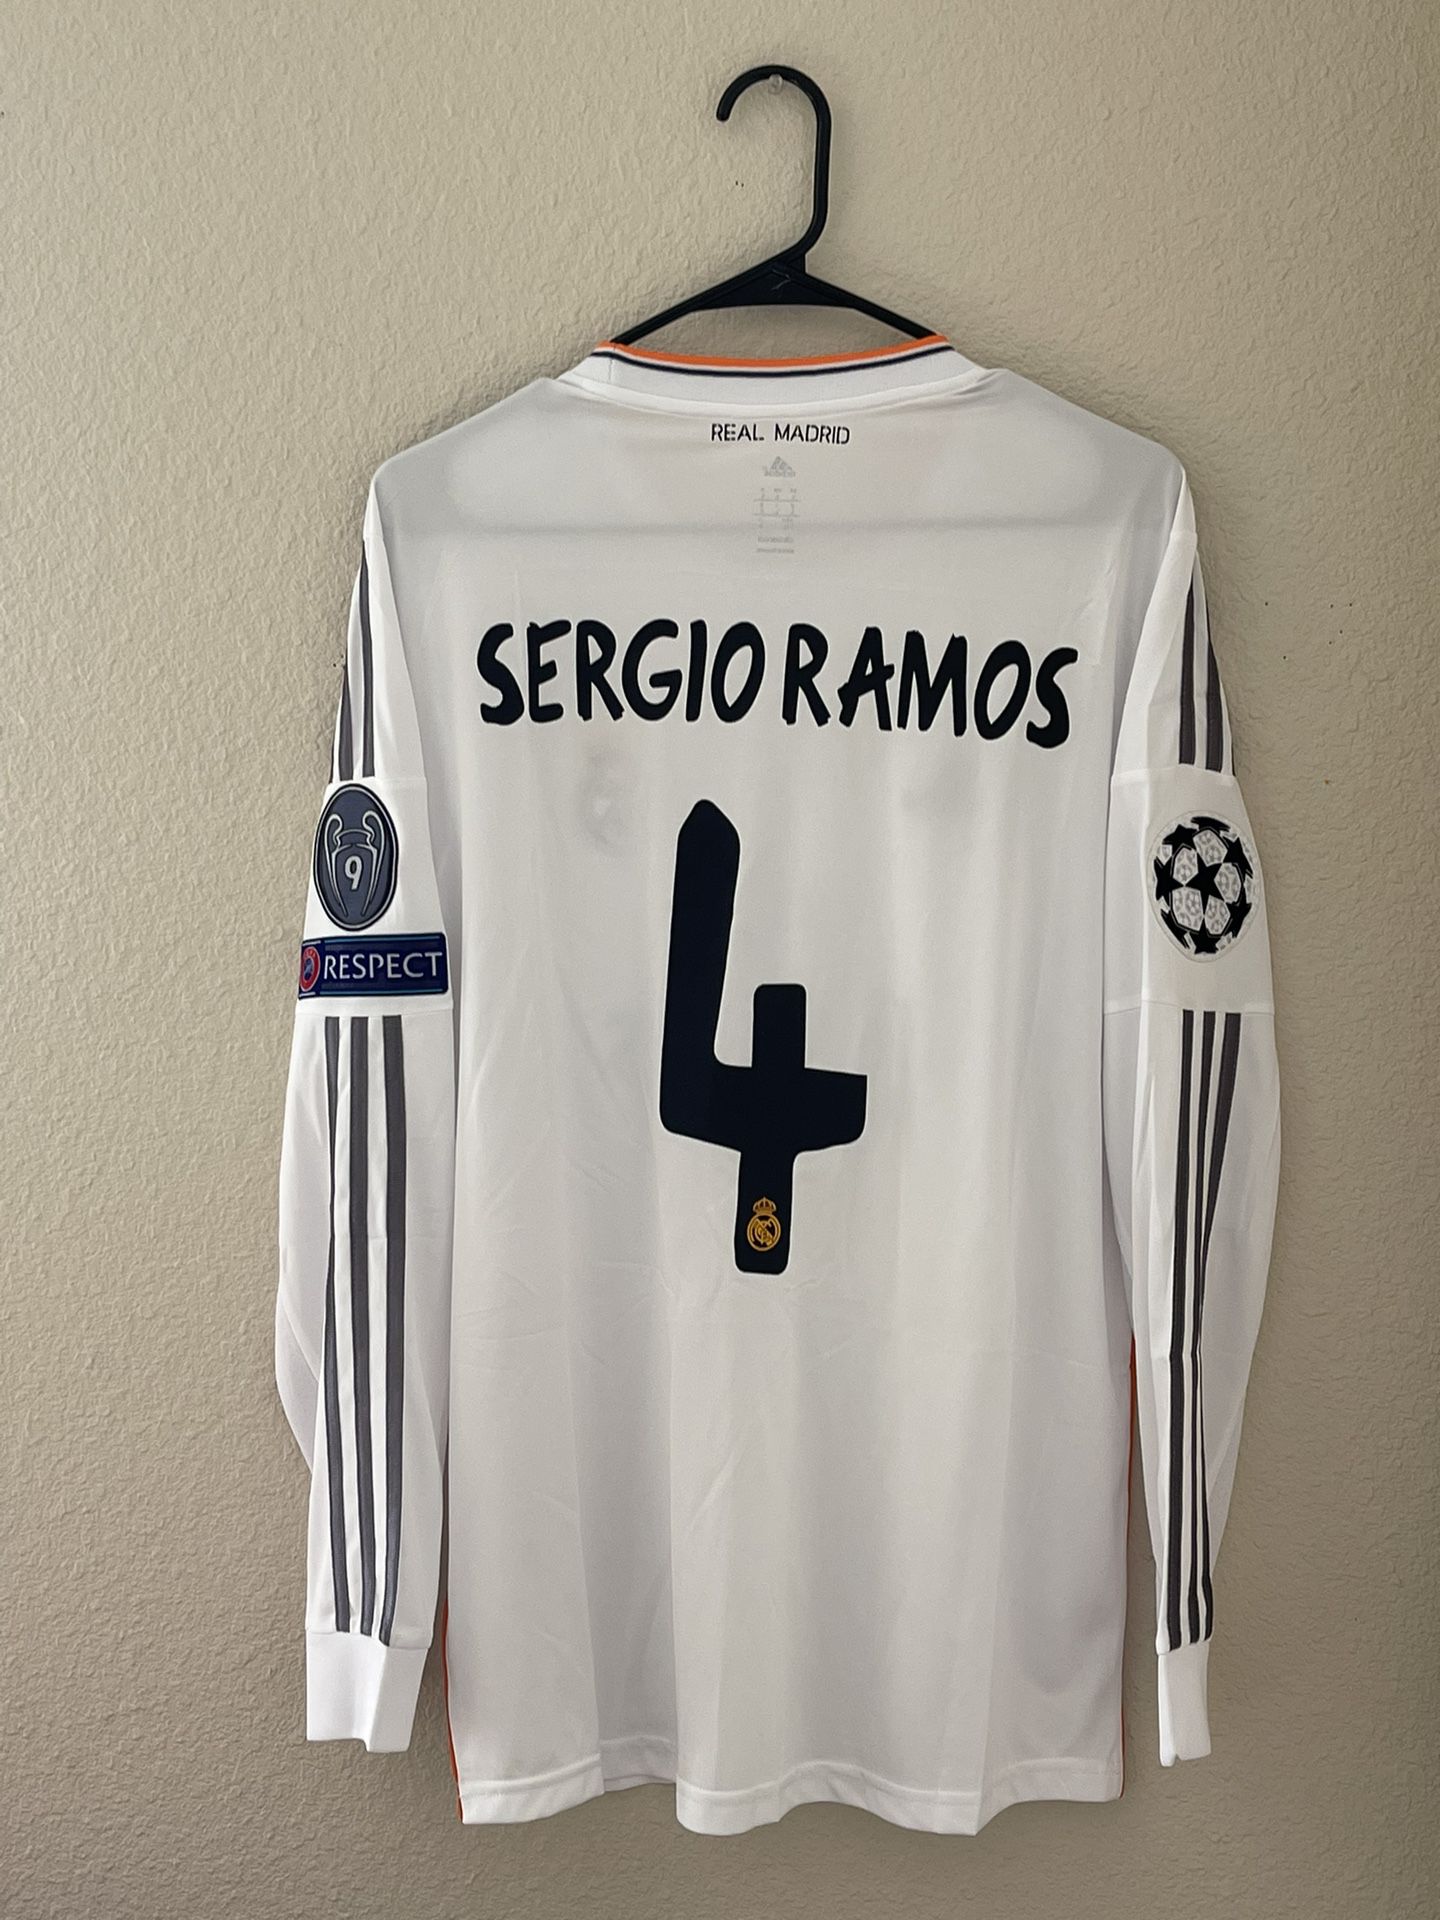 REAL MADRID Signed Jersey for Sale in Los Angeles, CA - OfferUp